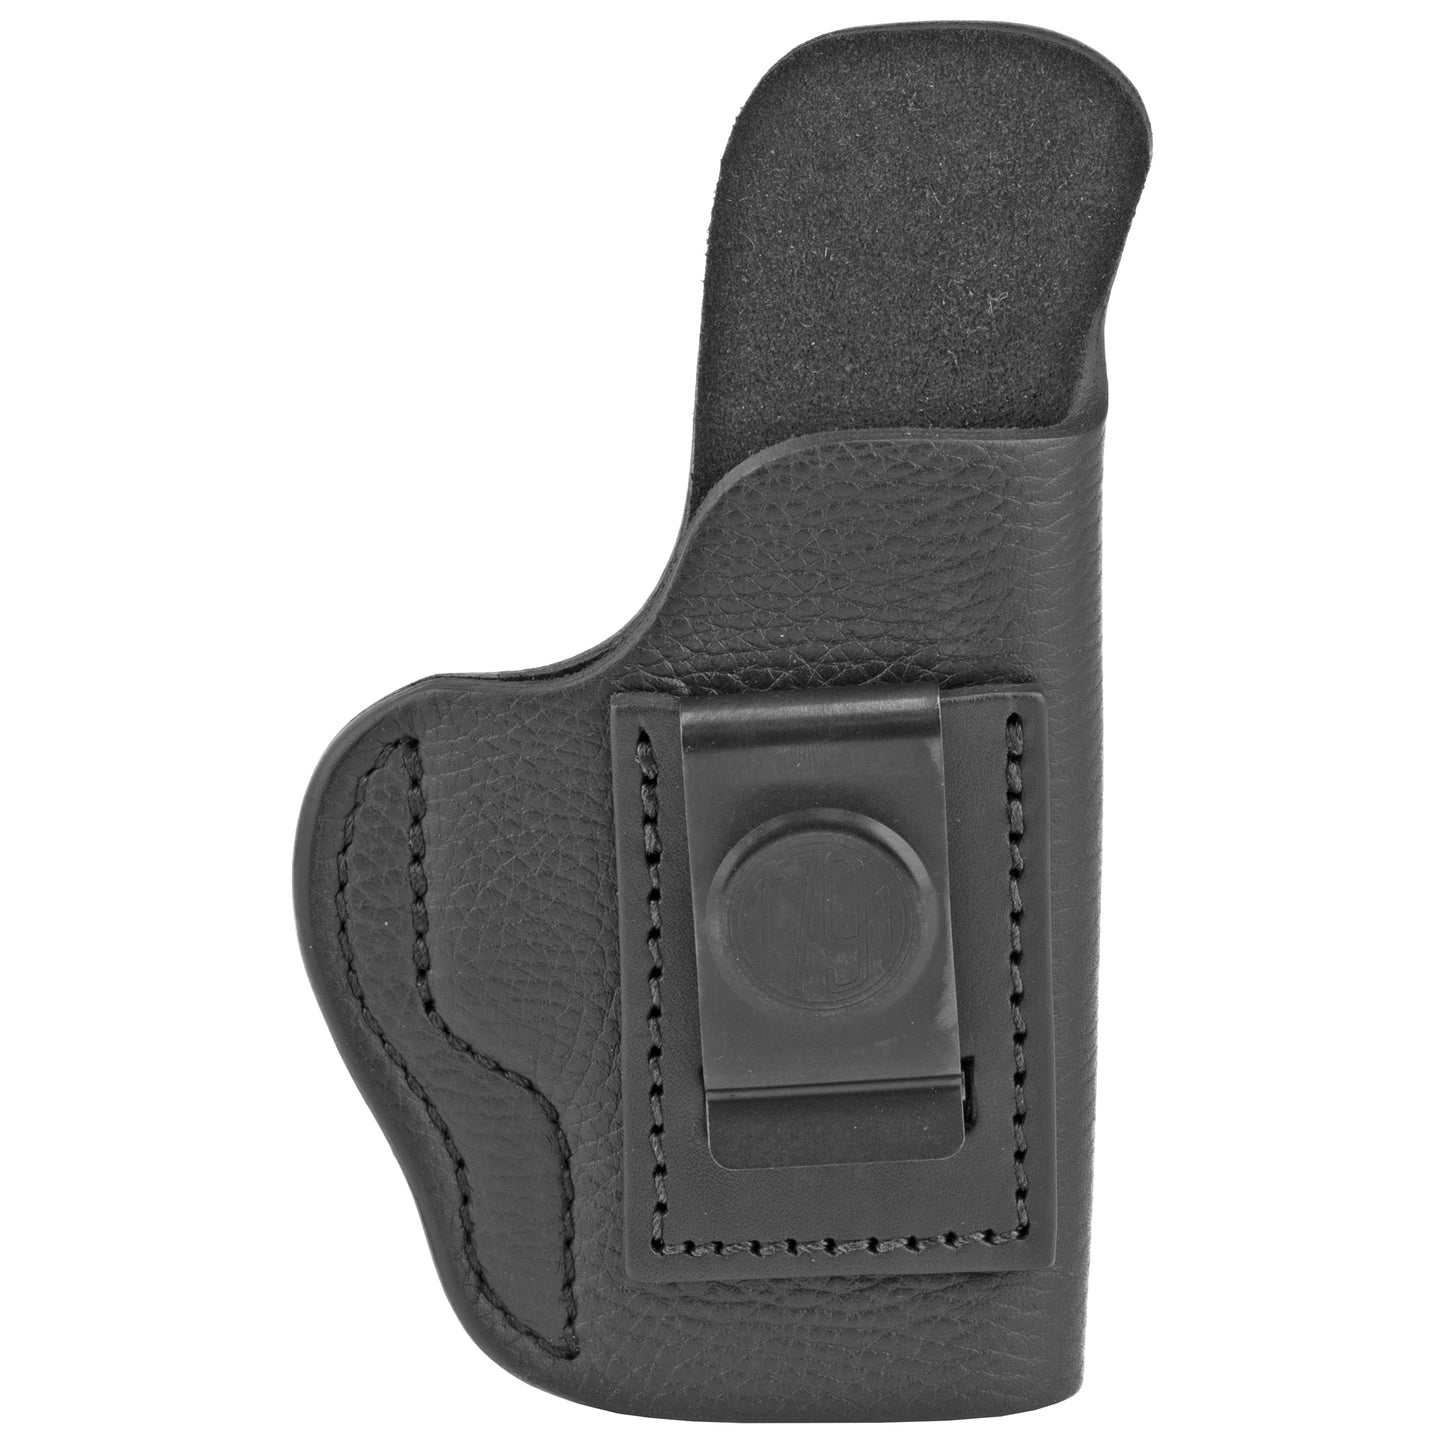 1791 Smooth Concealment IWB Holster Black Fits Glock 42/43/43X Right Hand Size 3